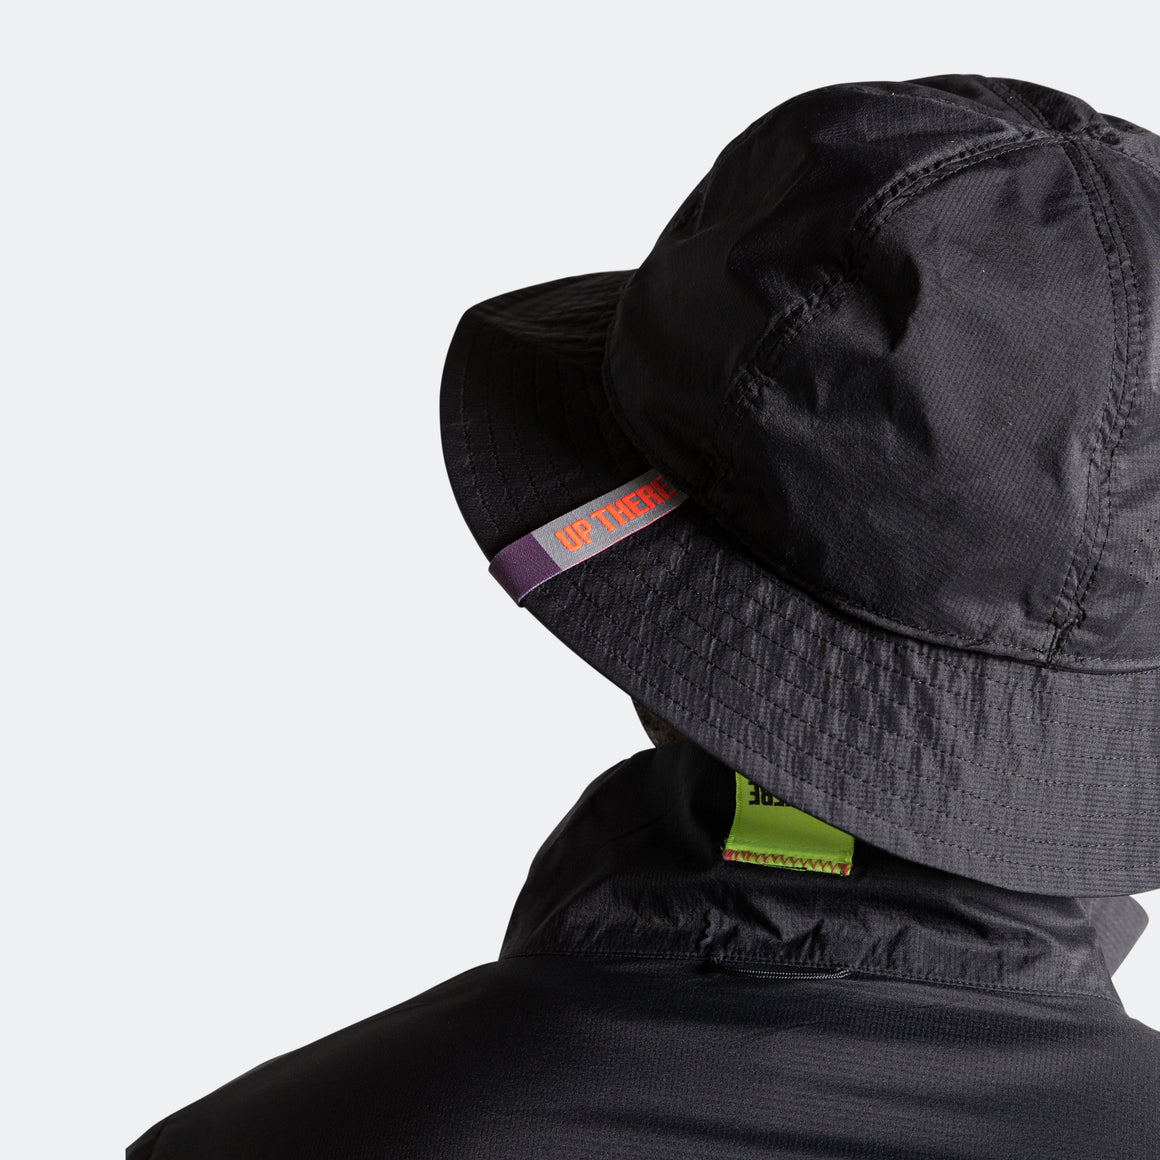 Asics - Ventilate Hat x UP THERE - Black - UP THERE